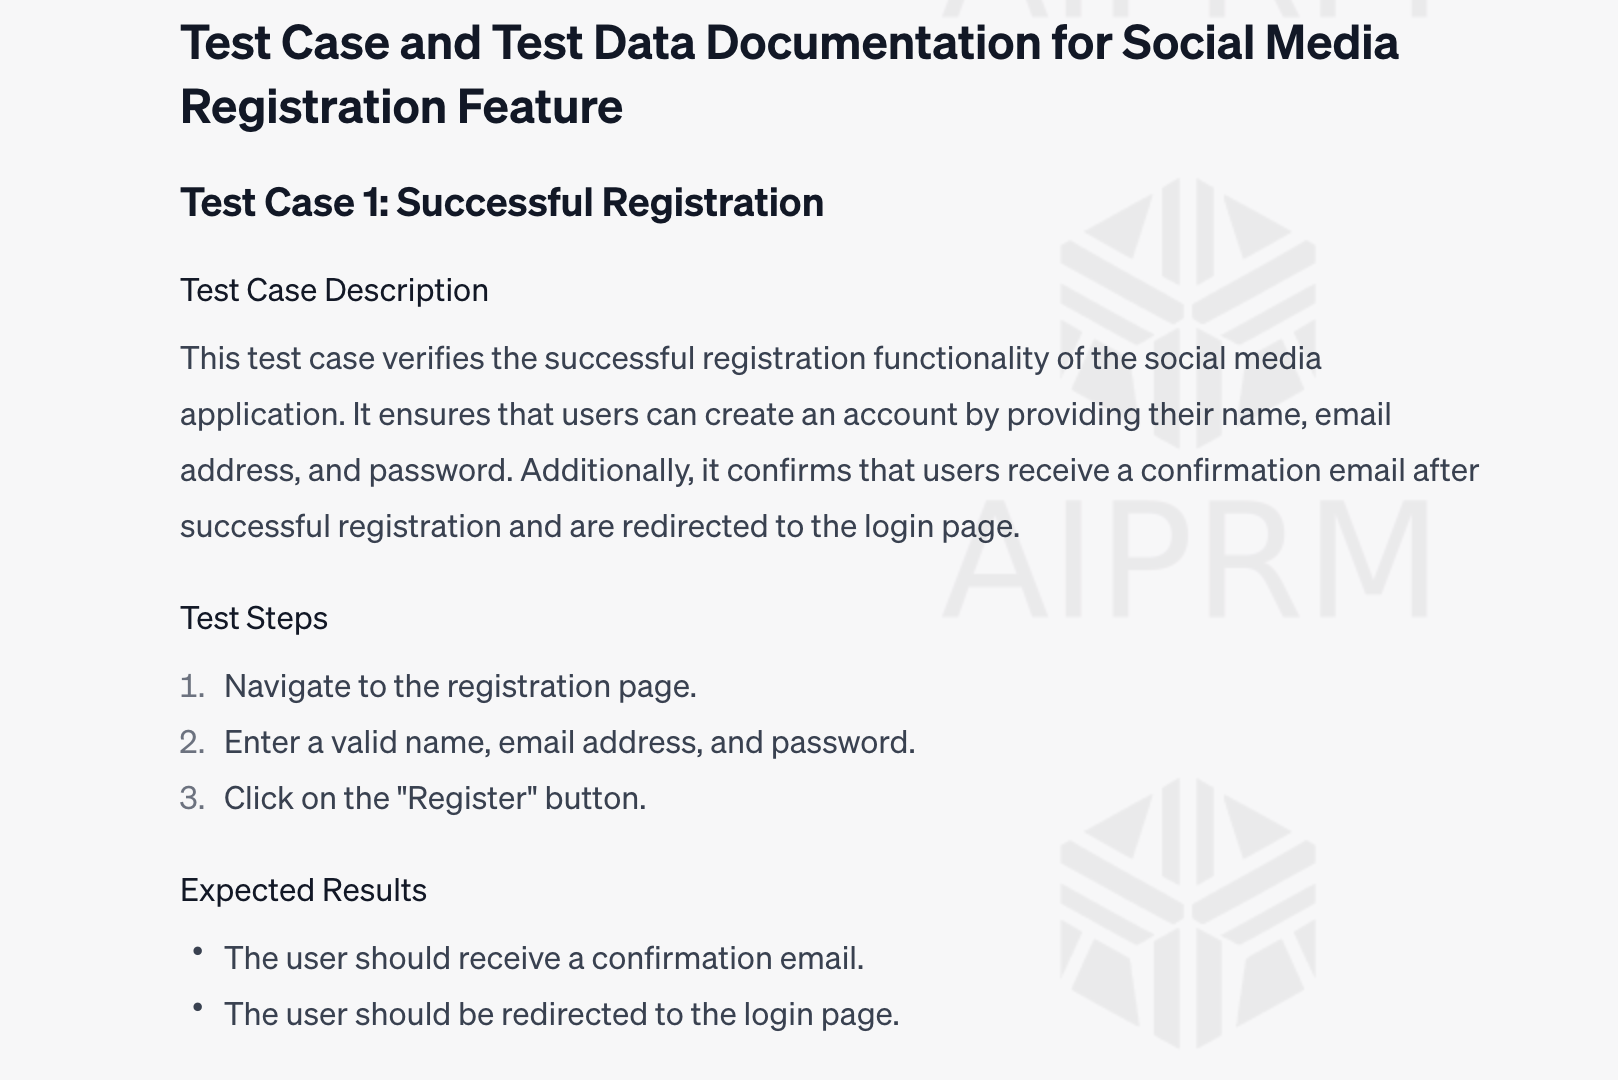 In the image, you can see the documentation for the first test case and data, which was successful registration: 